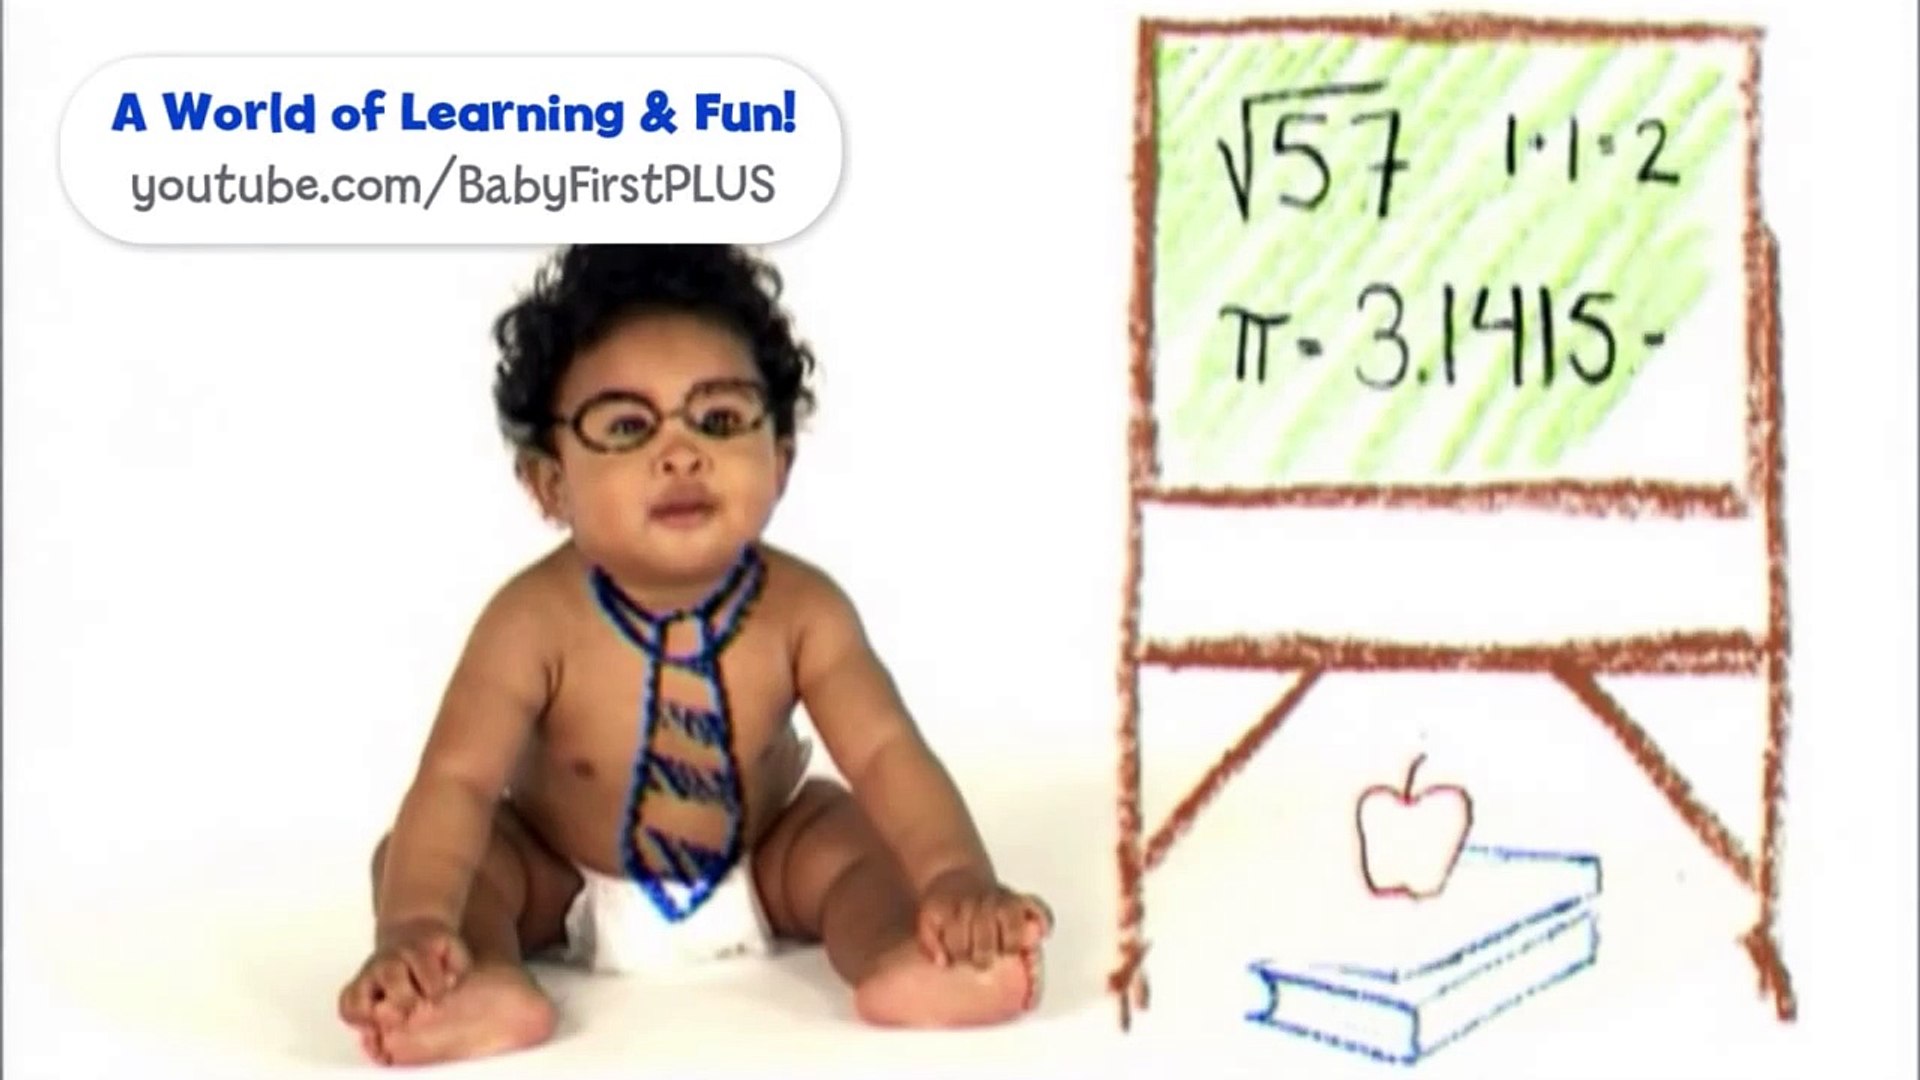 BabyFirstPLUS - Educational Videos for Baby!